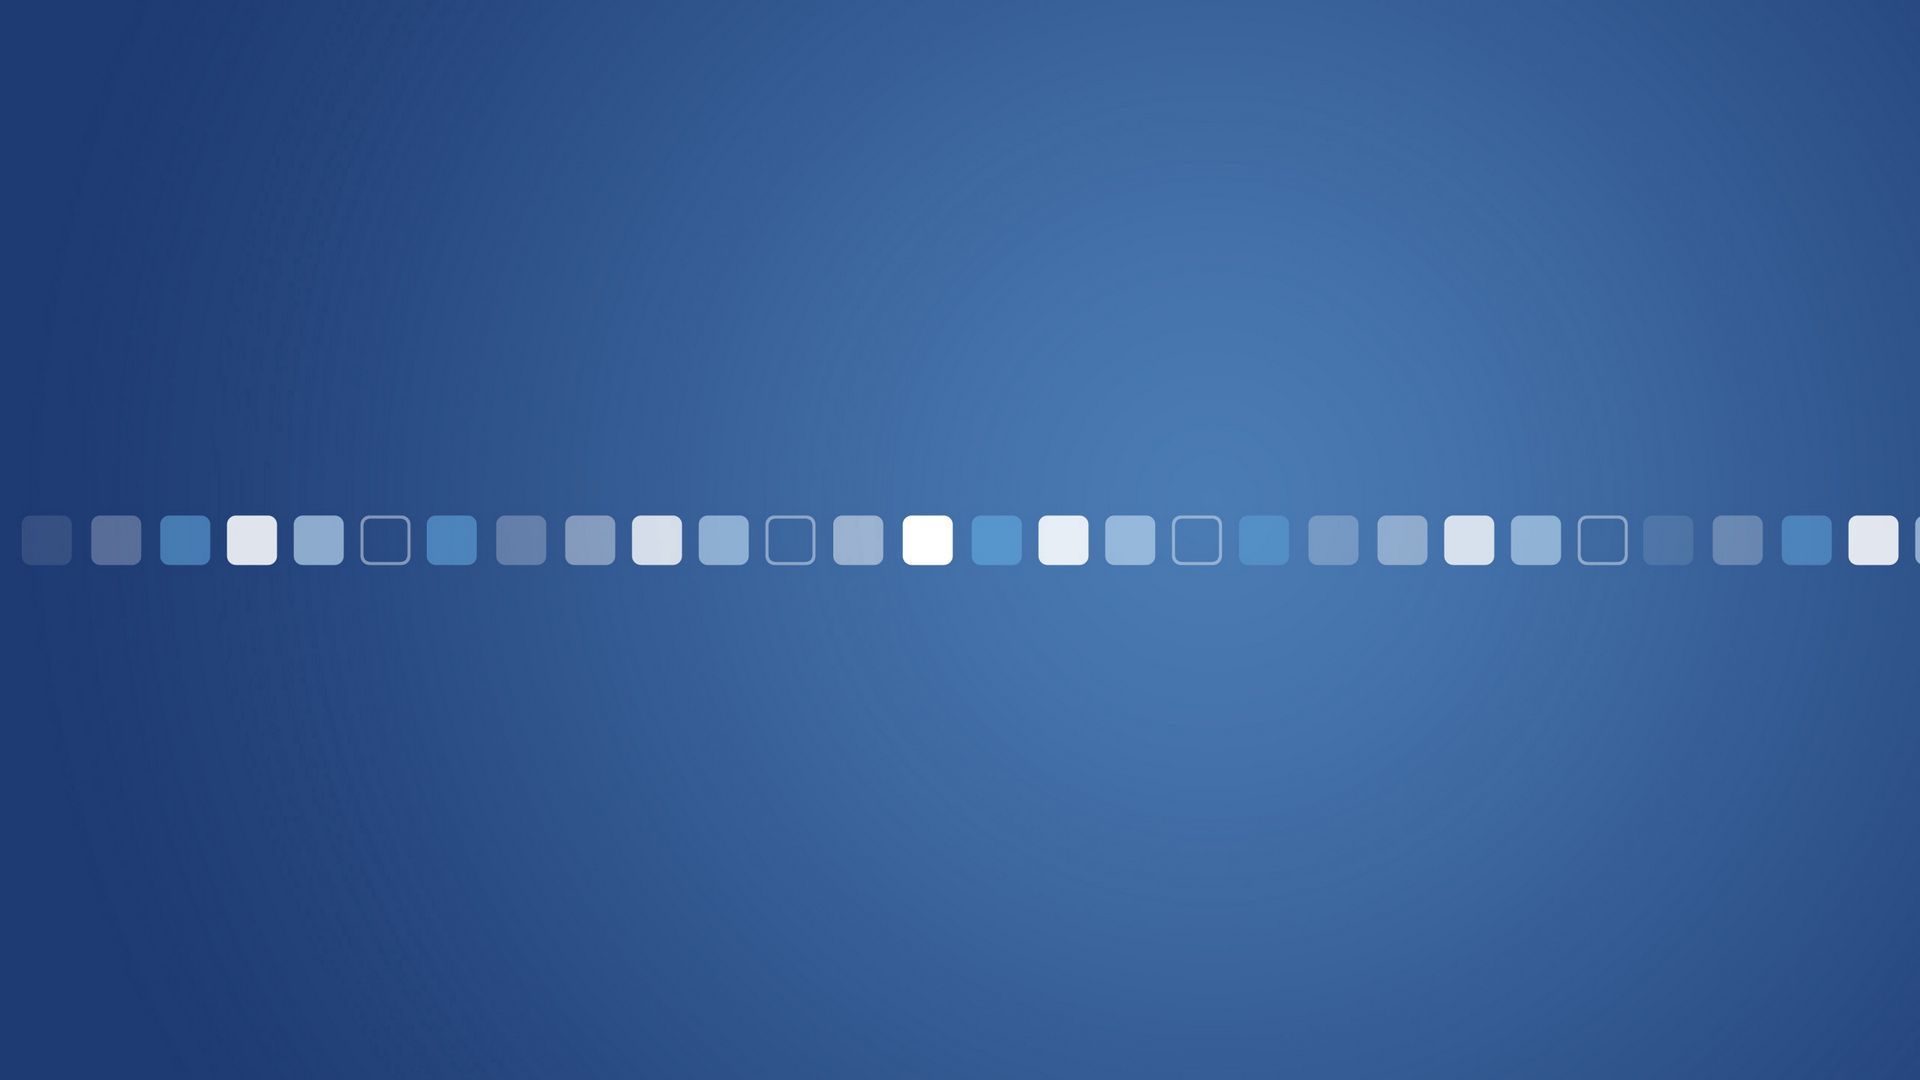 Download wallpaper 1920x1080 minimalism, squares, cubes, blue full hd, hdtv, fhd, 1080p HD background